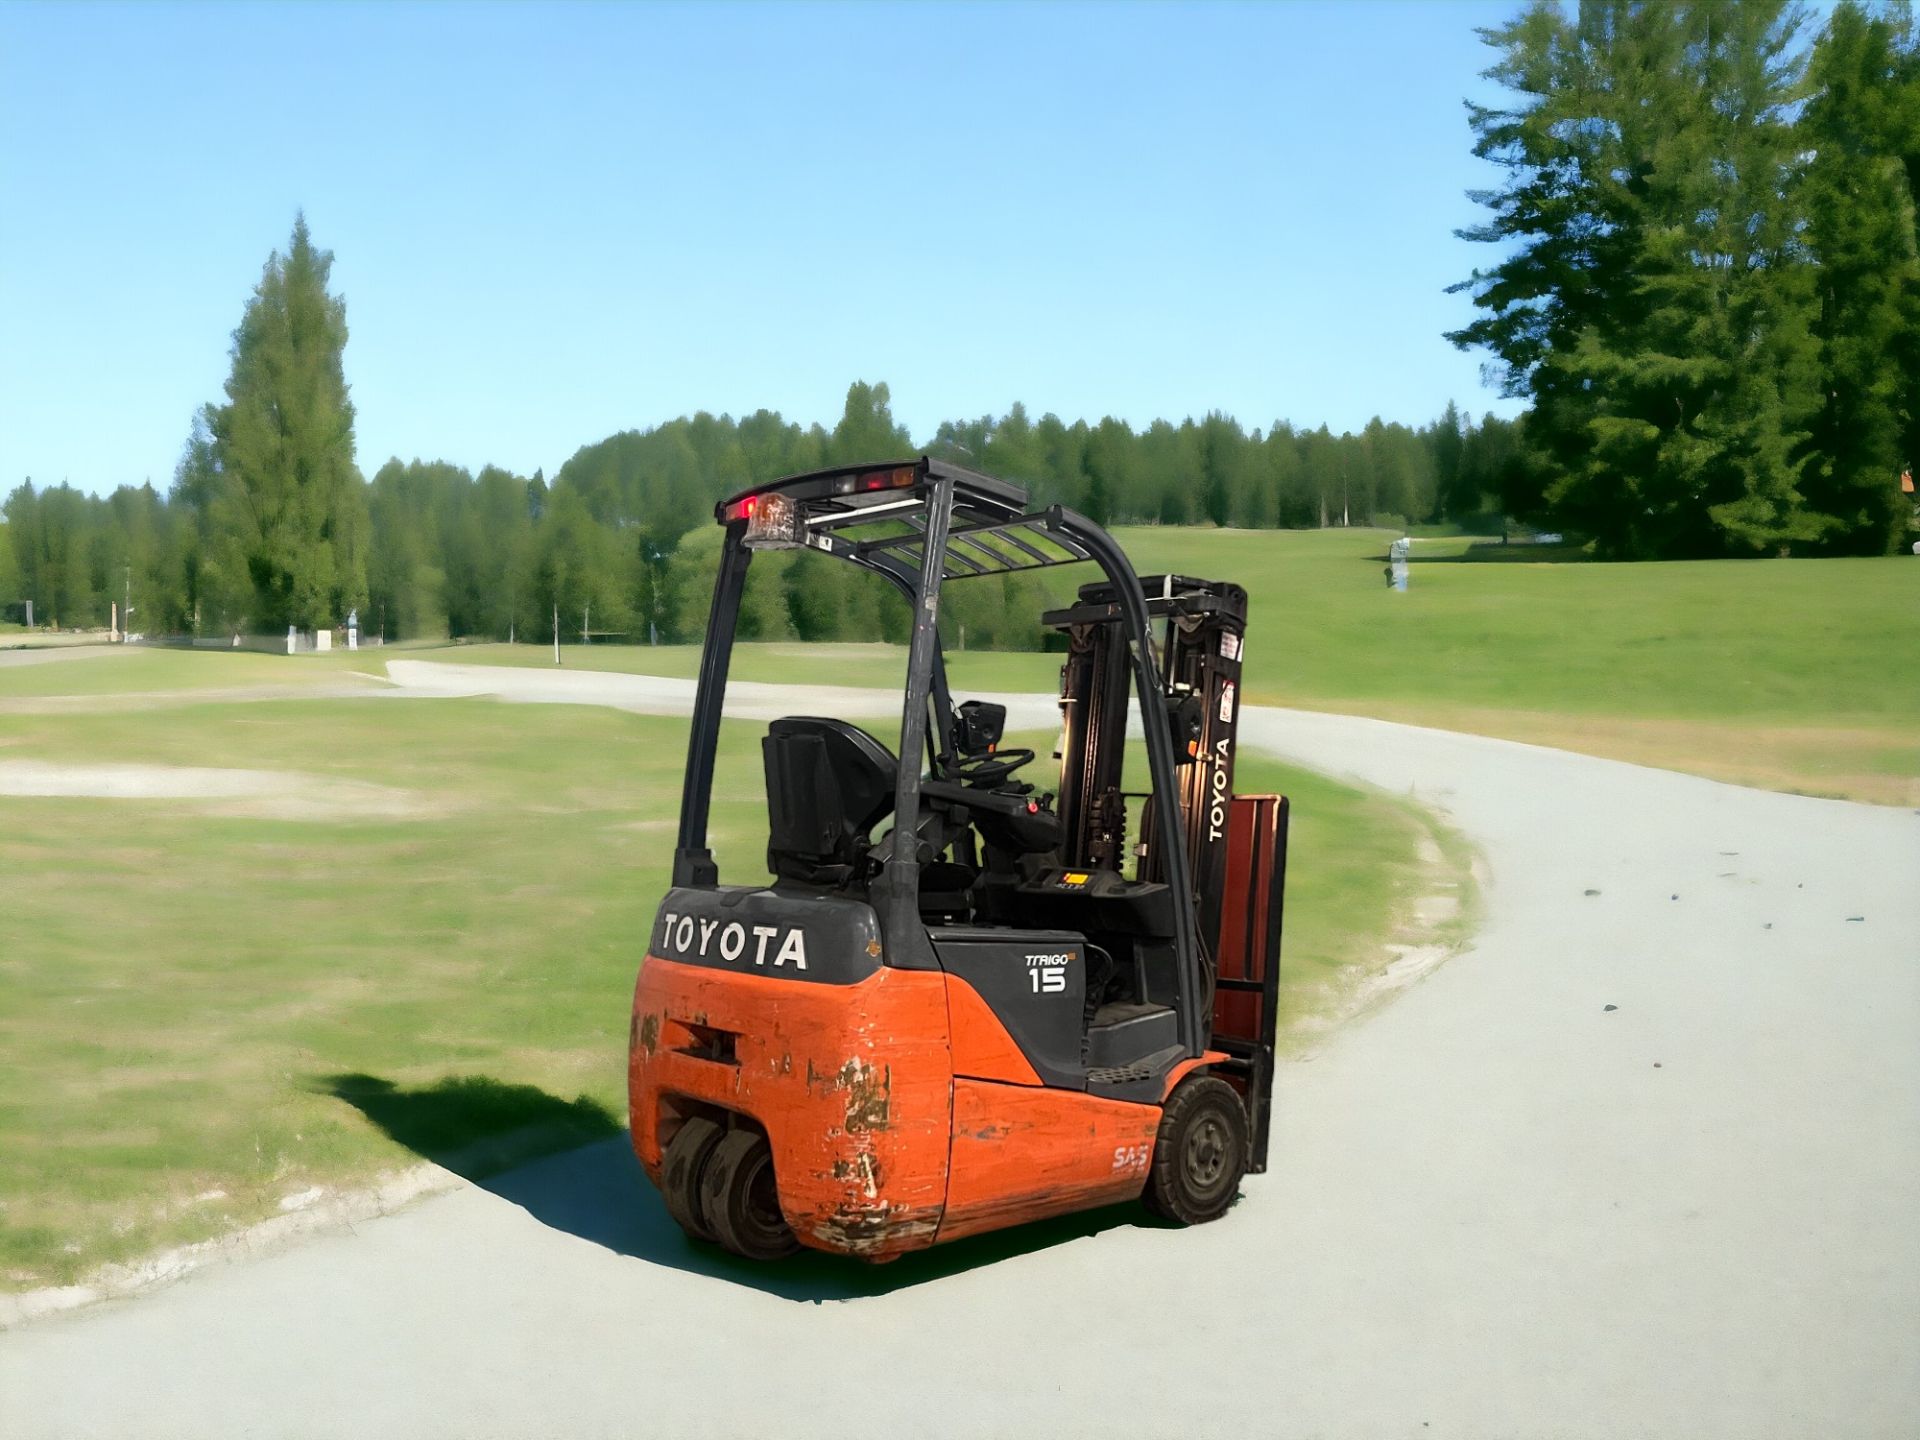 TOYOTA ELECTRIC 4-WHEEL FORKLIFT - 8FBET15 (2013) **(INCLUDES CHARGER)** - Image 6 of 6